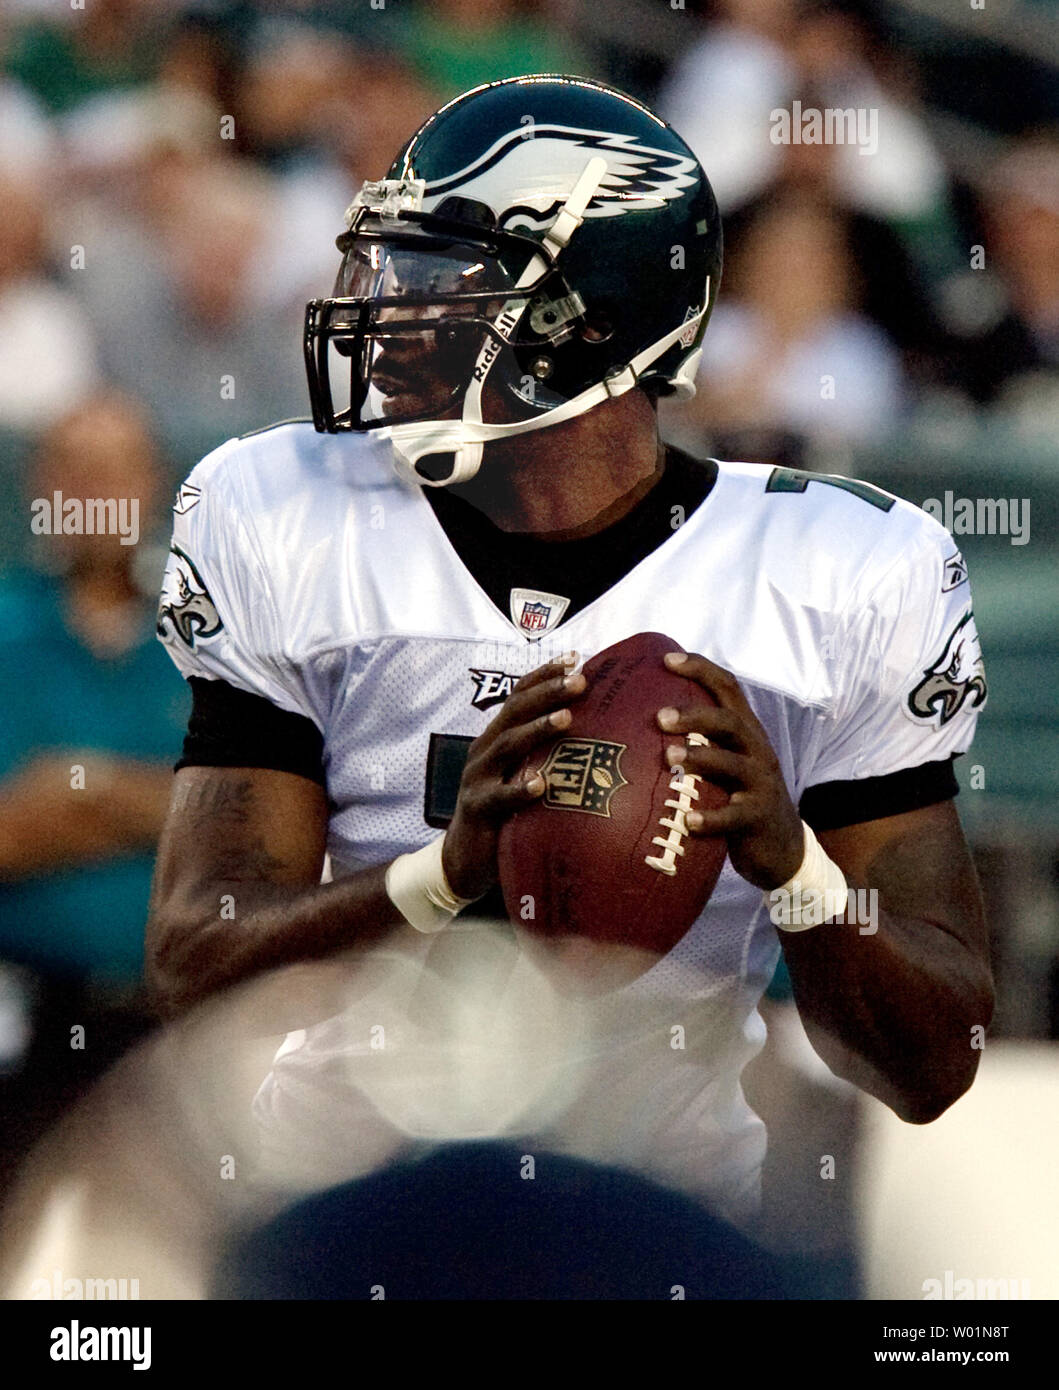 Michael Vick, recently released from prison for dogfighting charges, pulls back for a pass during first quarter Philadelphia Eagles-Jacksonville Jaguars preseason game in Philadelphia at Lincoln Financial Field August 27, 2009.Vick signed a one year contract with options with the Eagles immediately after his release from prison and has not played in a NFL game since 2006.   UPI/John Anderson Stock Photo